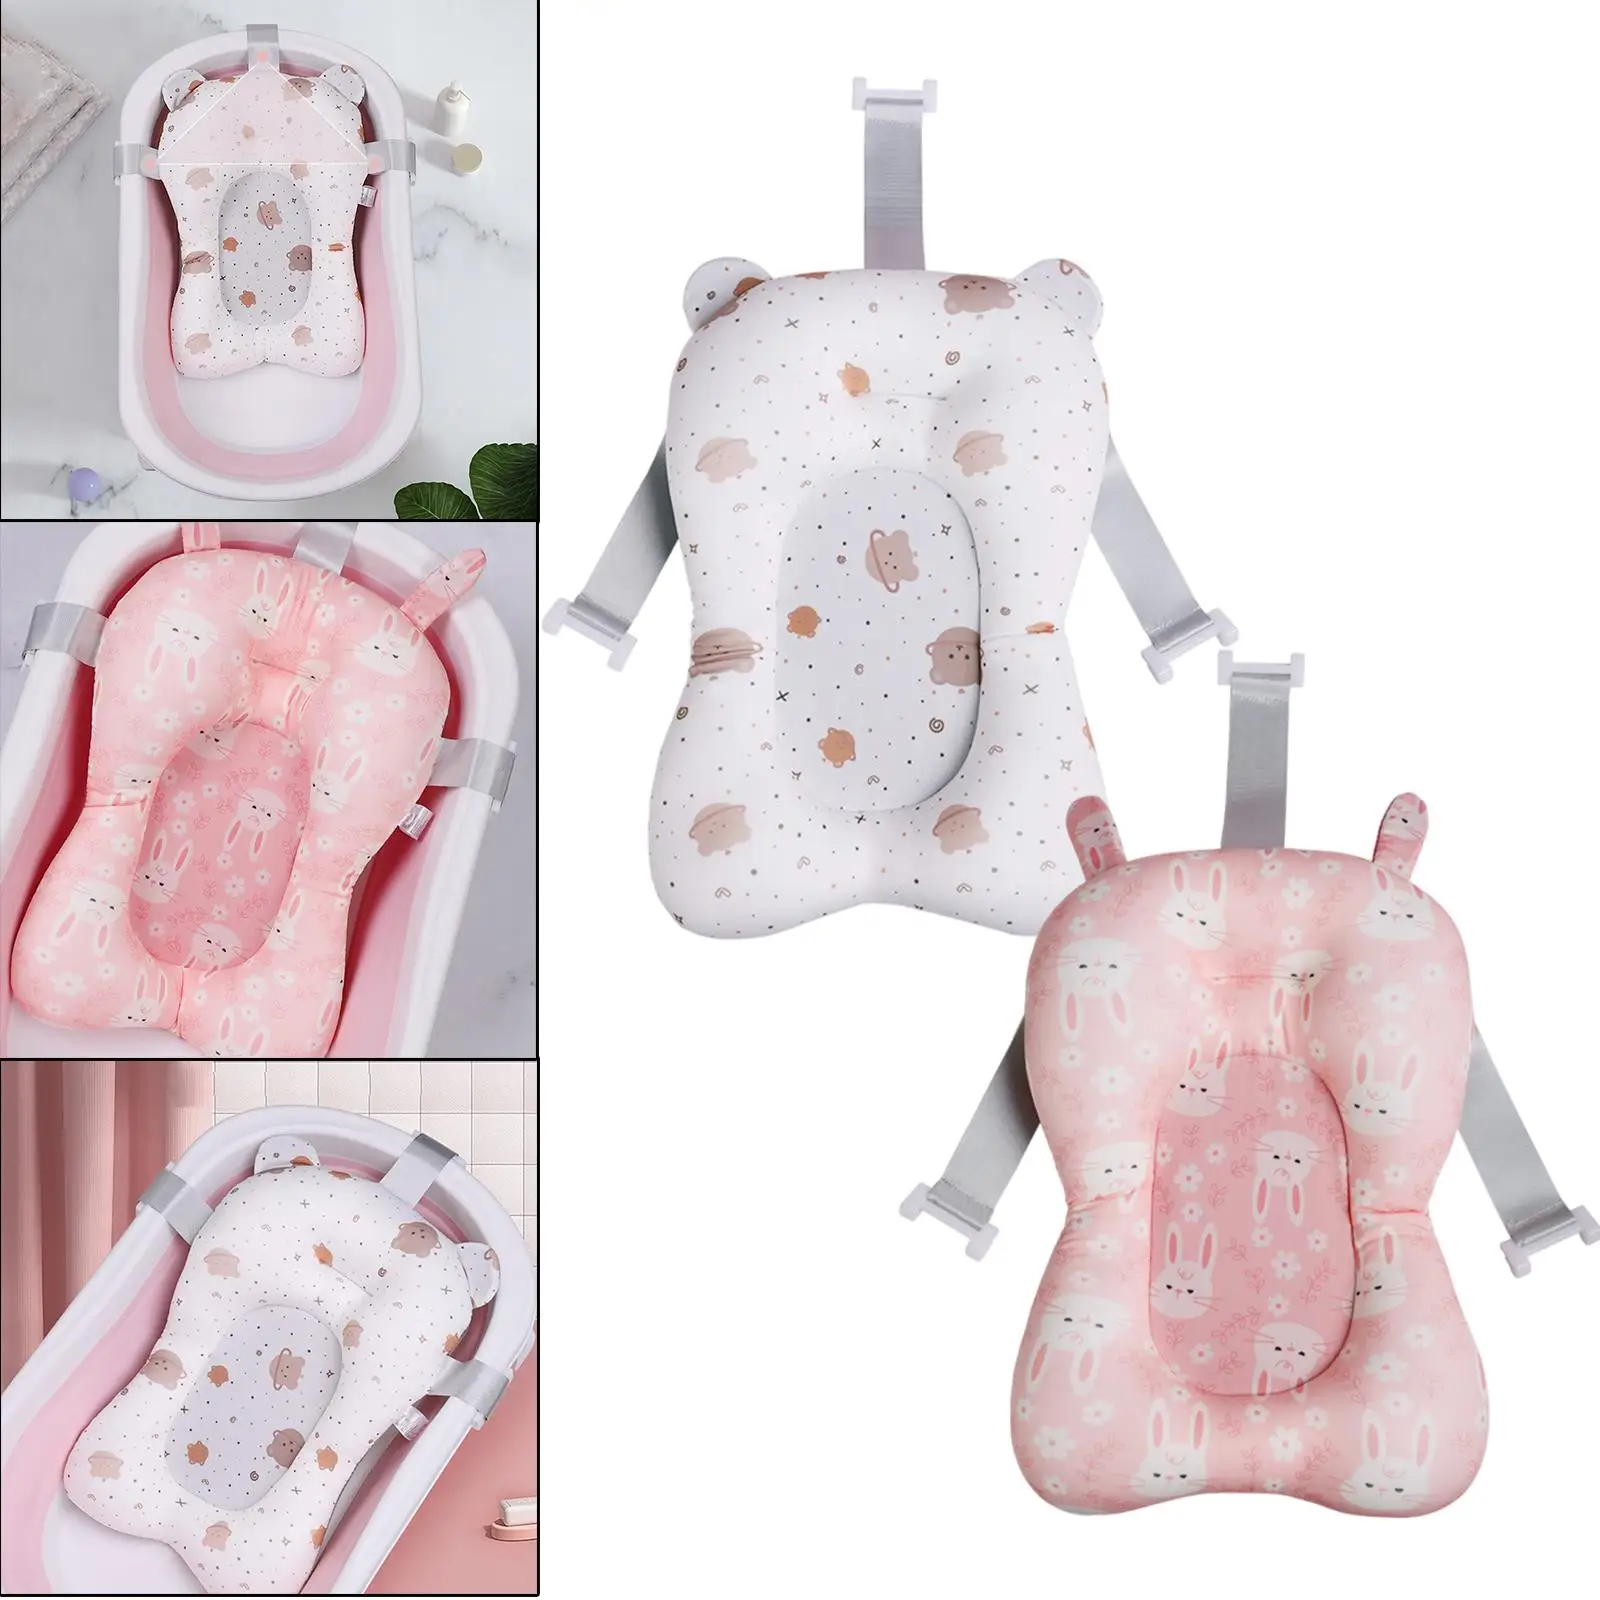 Comfortable Bath Support Seat Adjustable Portable Soft Baby Bath Seat Baby Bath Tub Pad Baby Bath Pillow 0-6 Months Baby Toddler